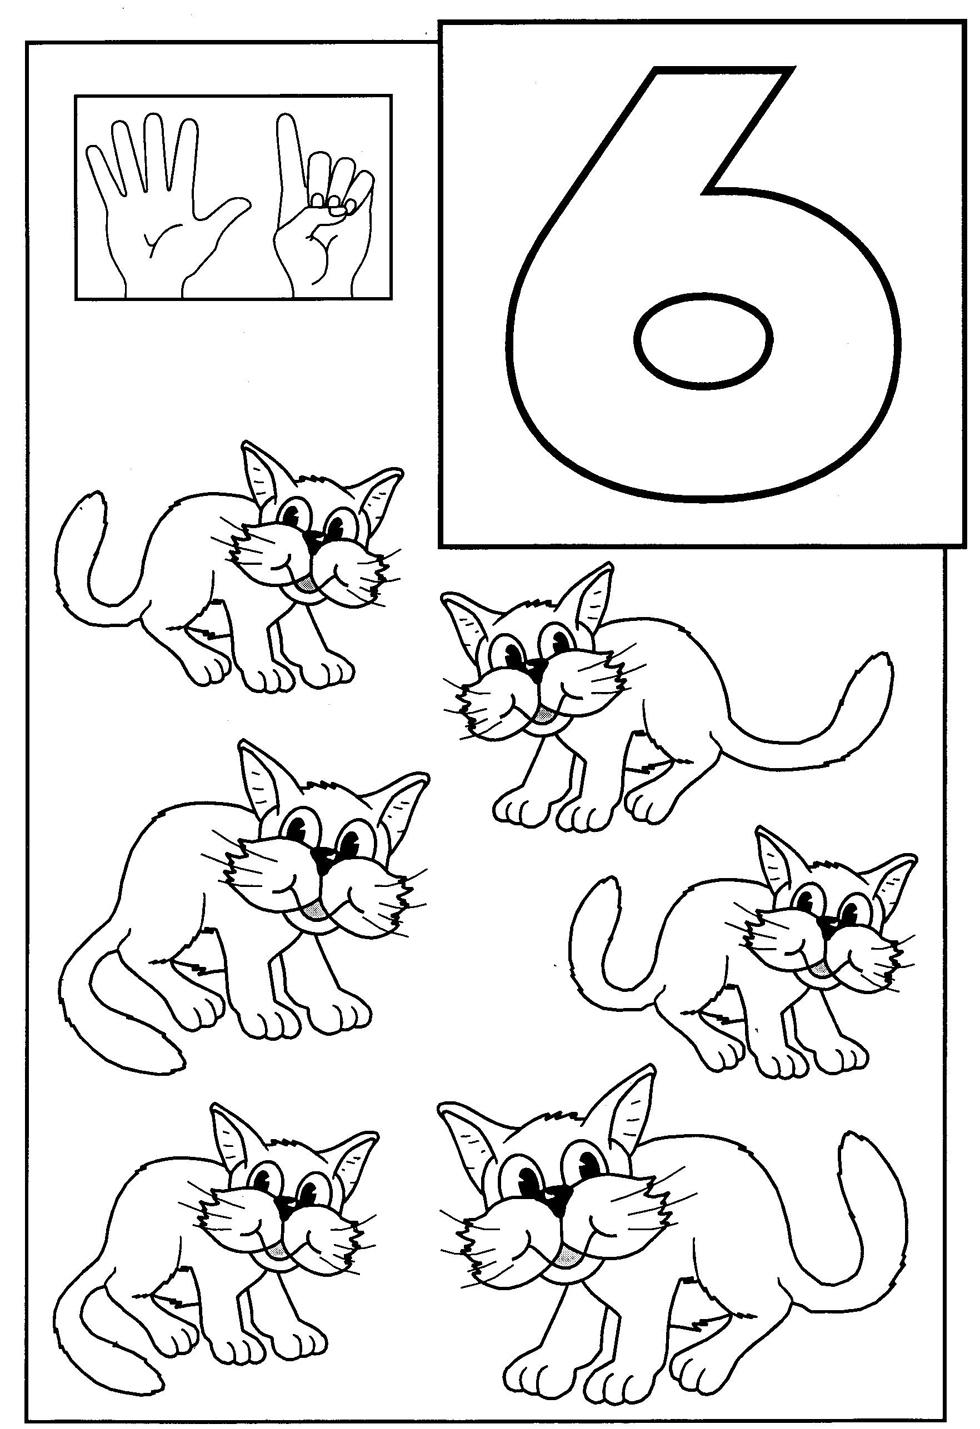 coloring page for 6 number 6 coloring page getcoloringpagescom coloring page 6 for 